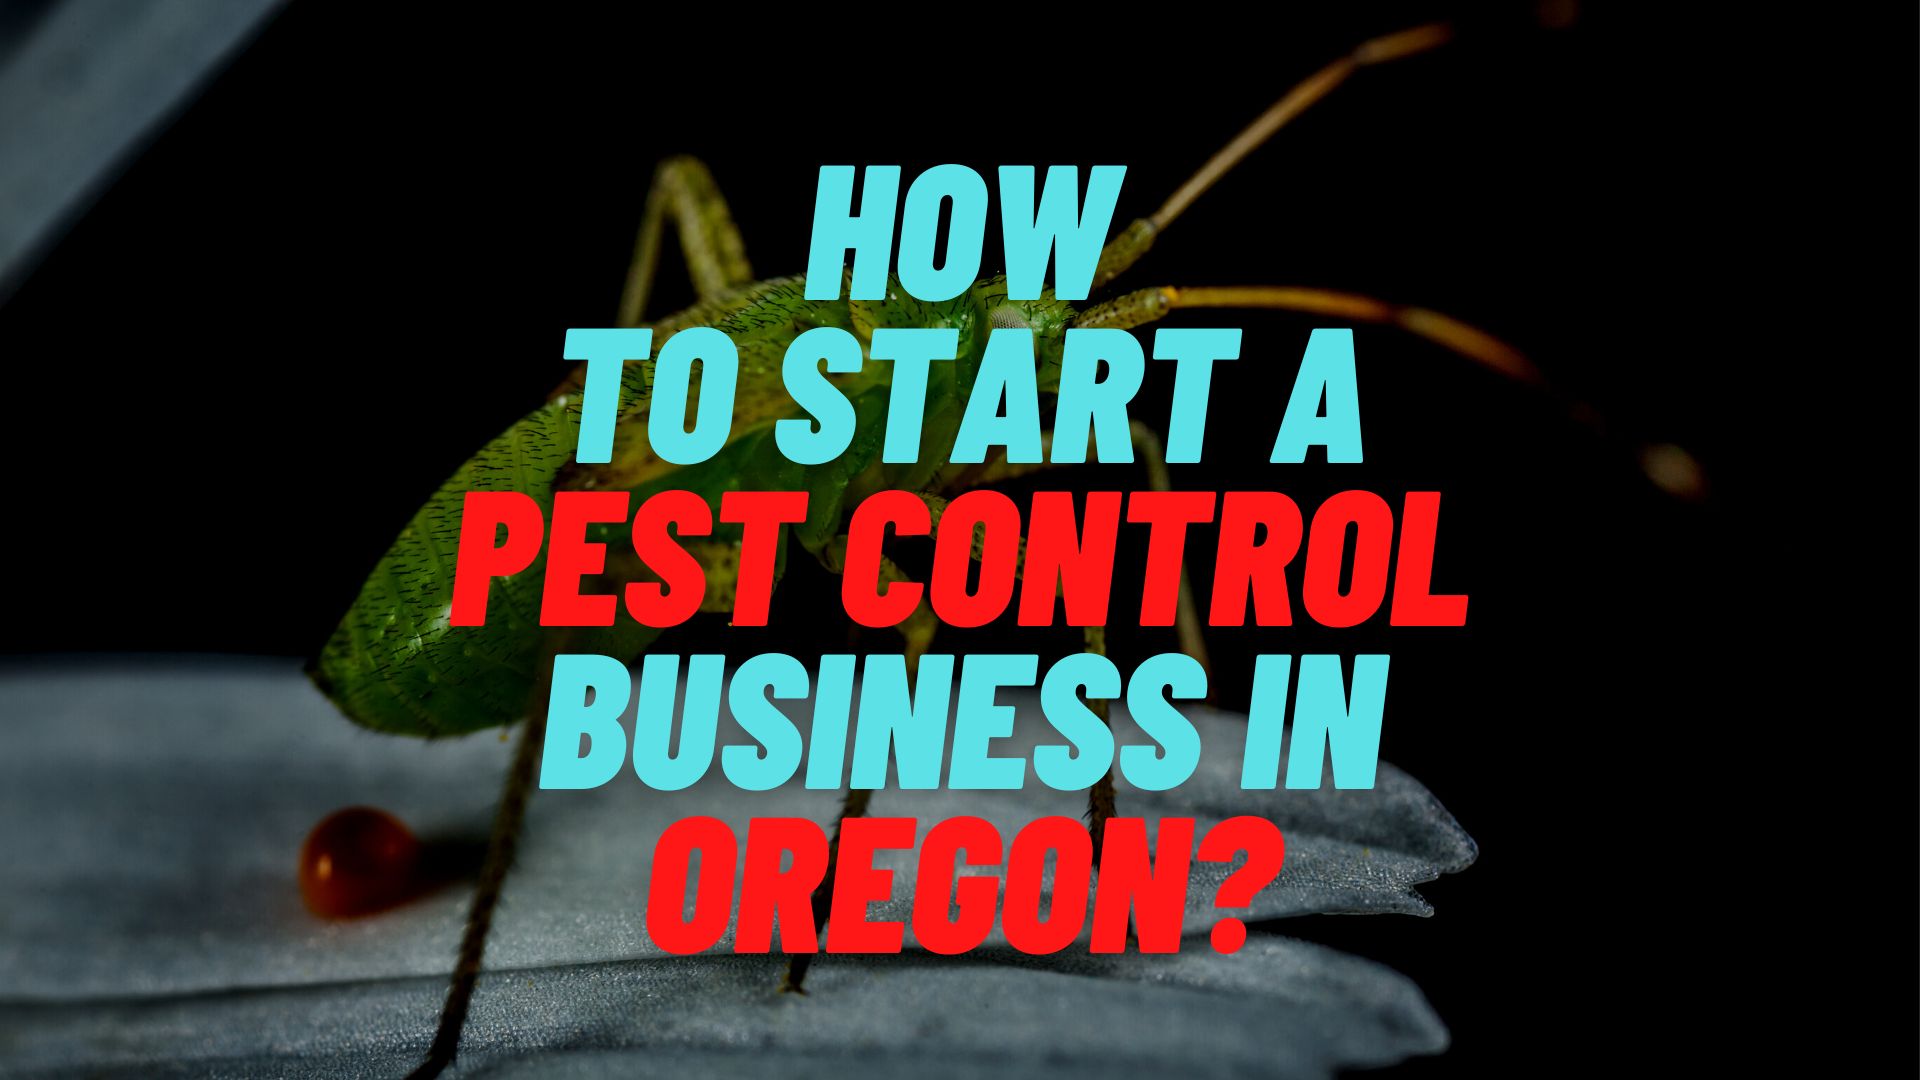 How to start a pest control business in Oregon?